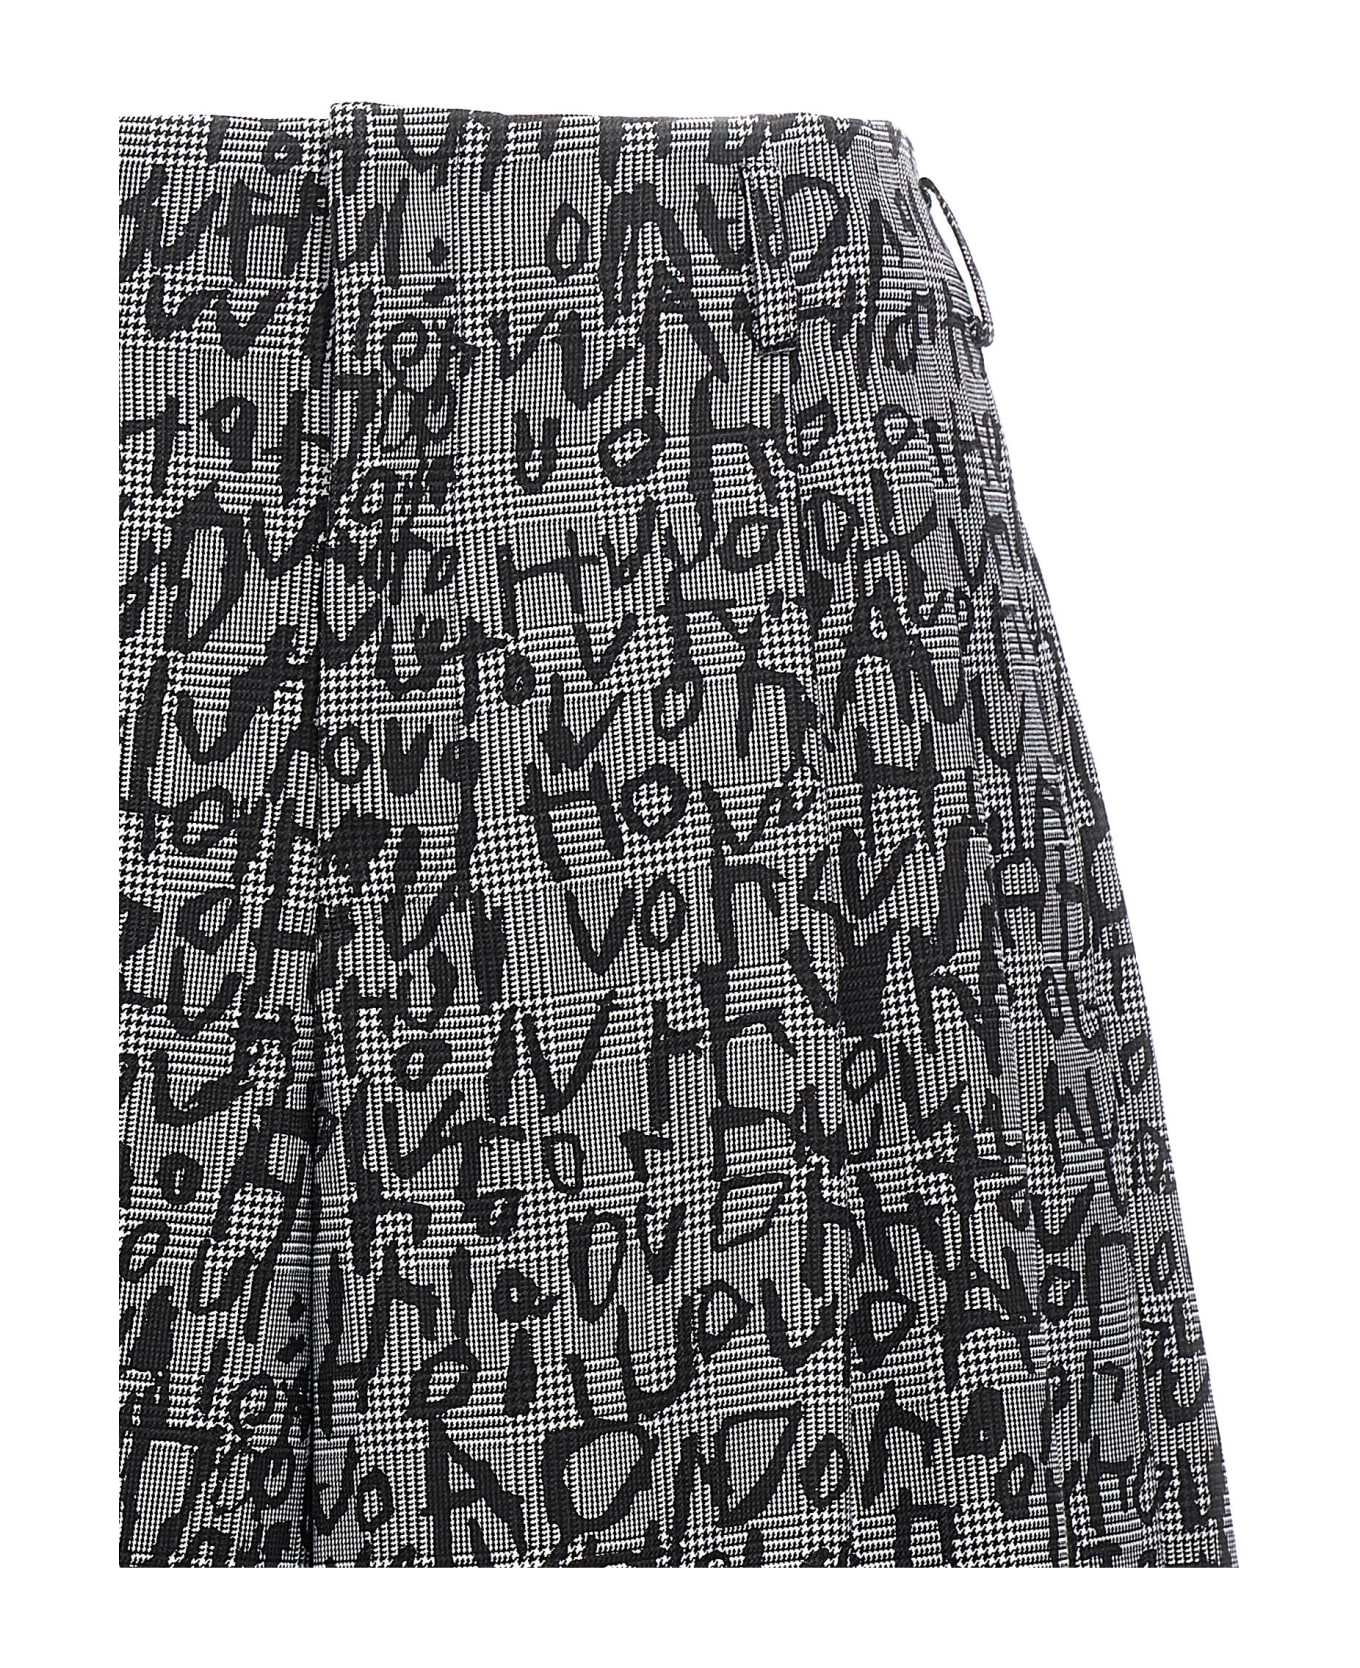 Comme Des Garçons Homme Plus All Over Print Brmuda Shorts - BLACK ボトムス